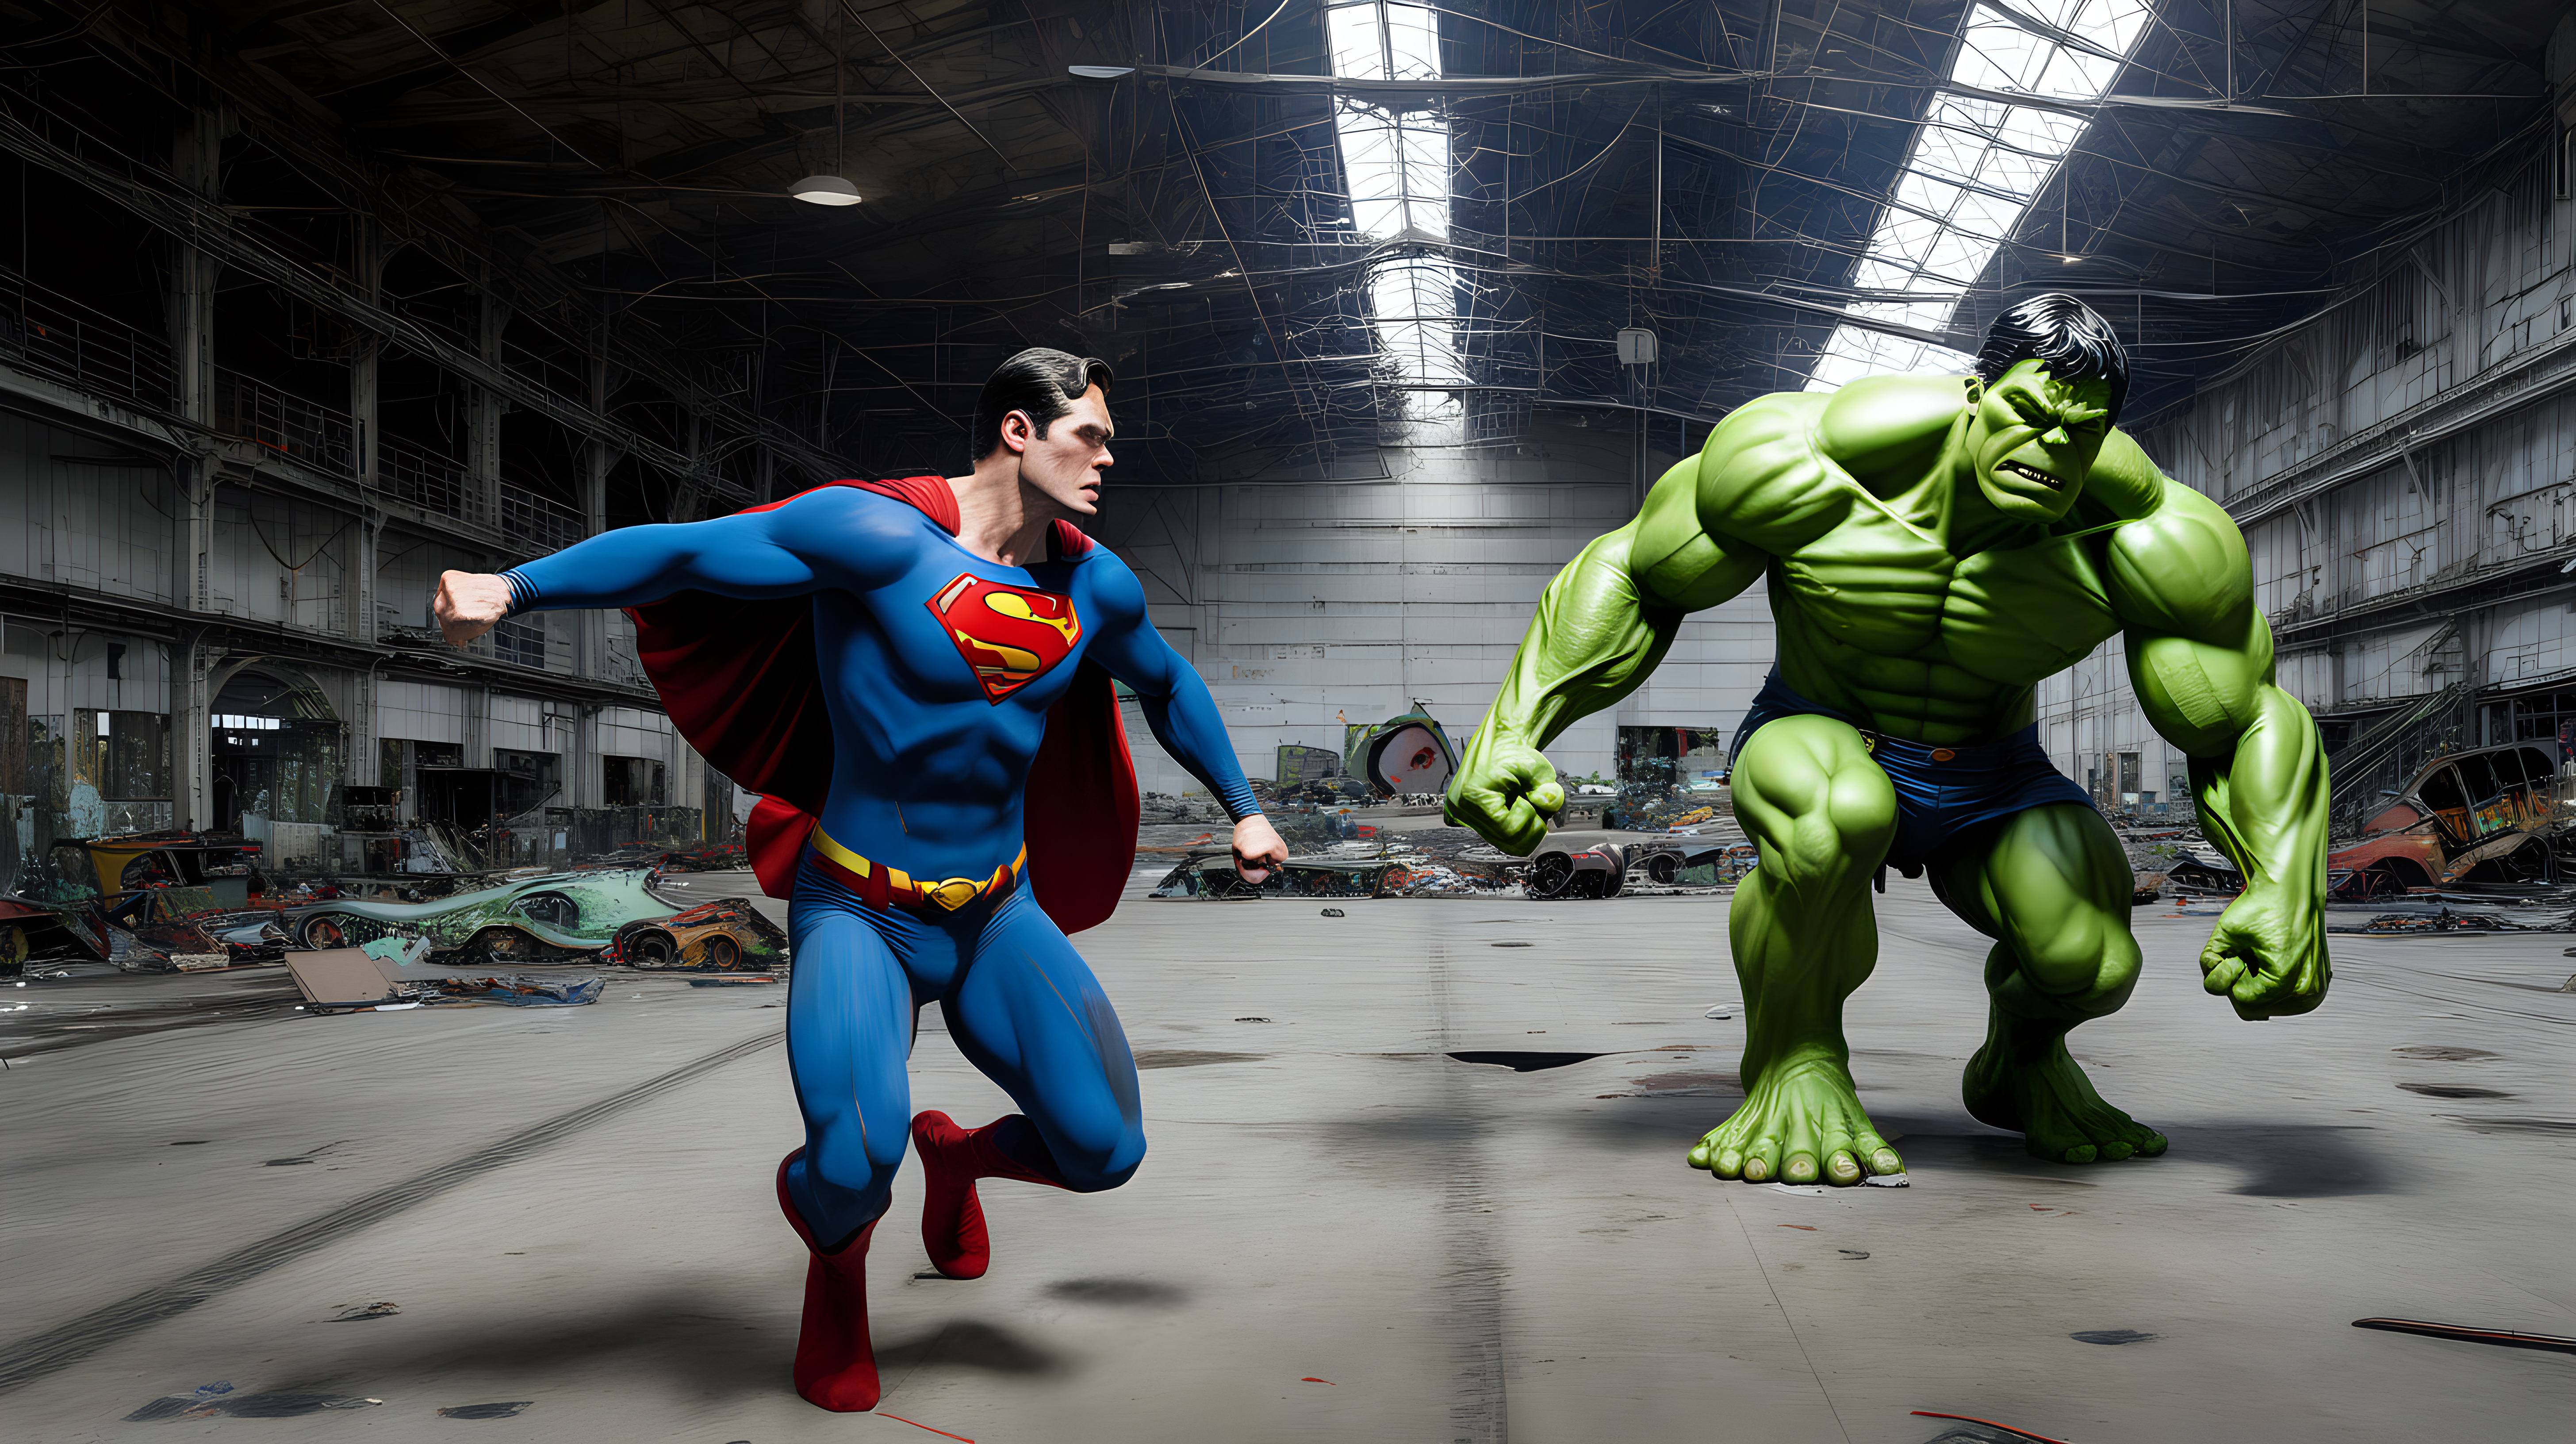 Superman fights the hulk in an abandoned airplane